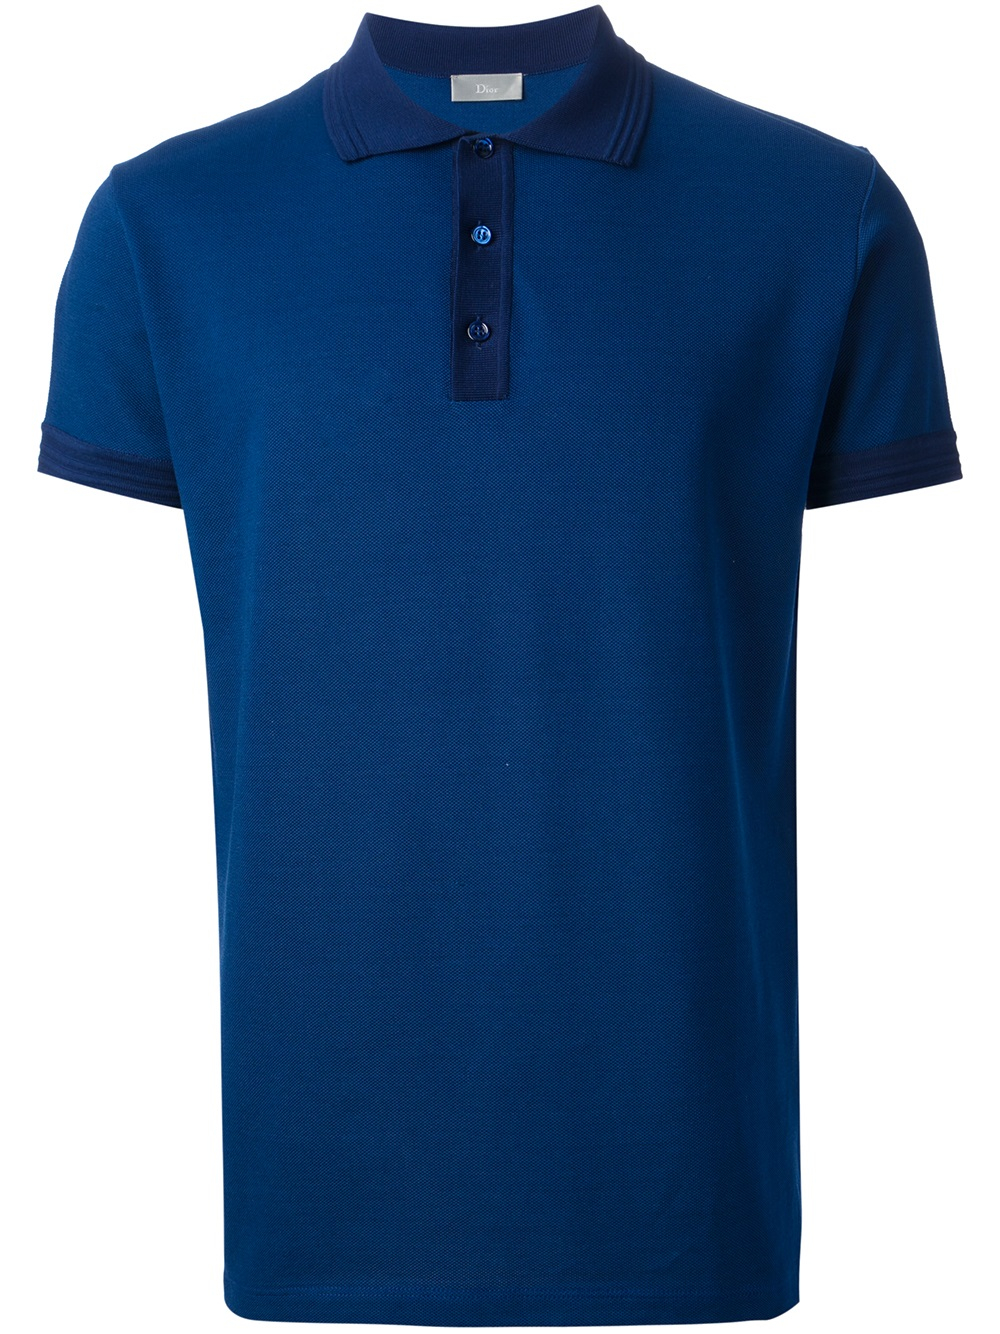 Dior Homme Contrast Collar Polo Shirt in Blue for Men - Lyst